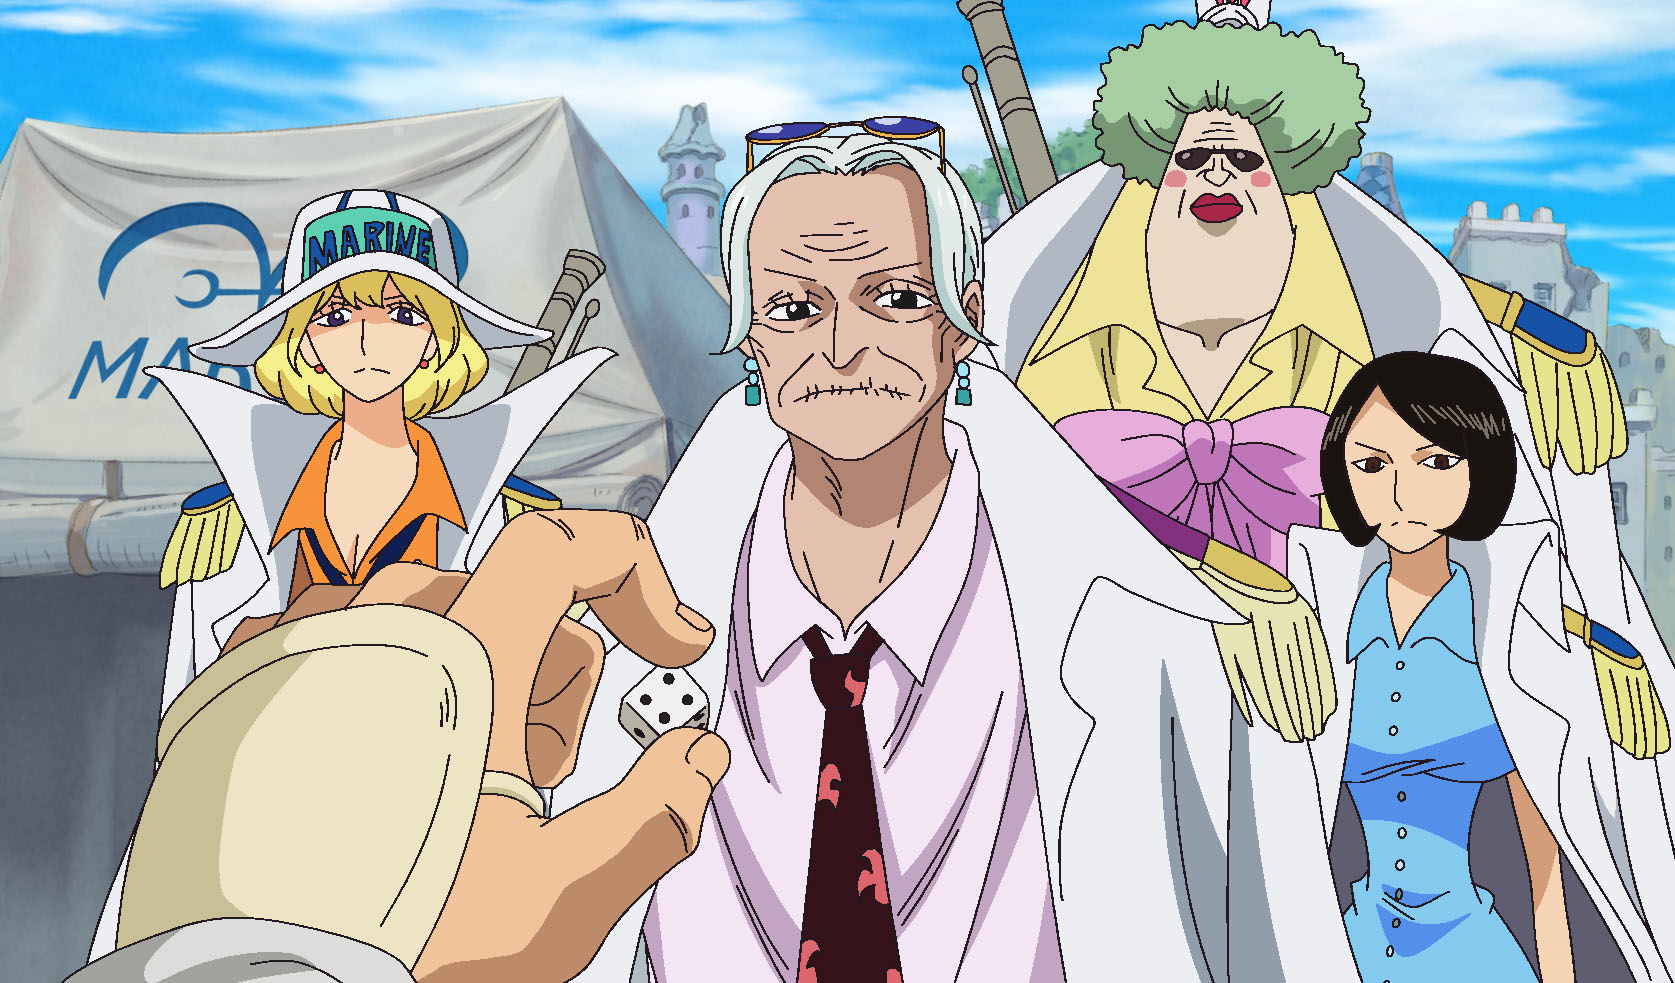 Download 480p One Piece Episode 010 Hd Subtitle Indonesia WATCH - Lanibraun - How Many Episodes Of Dub One Piece